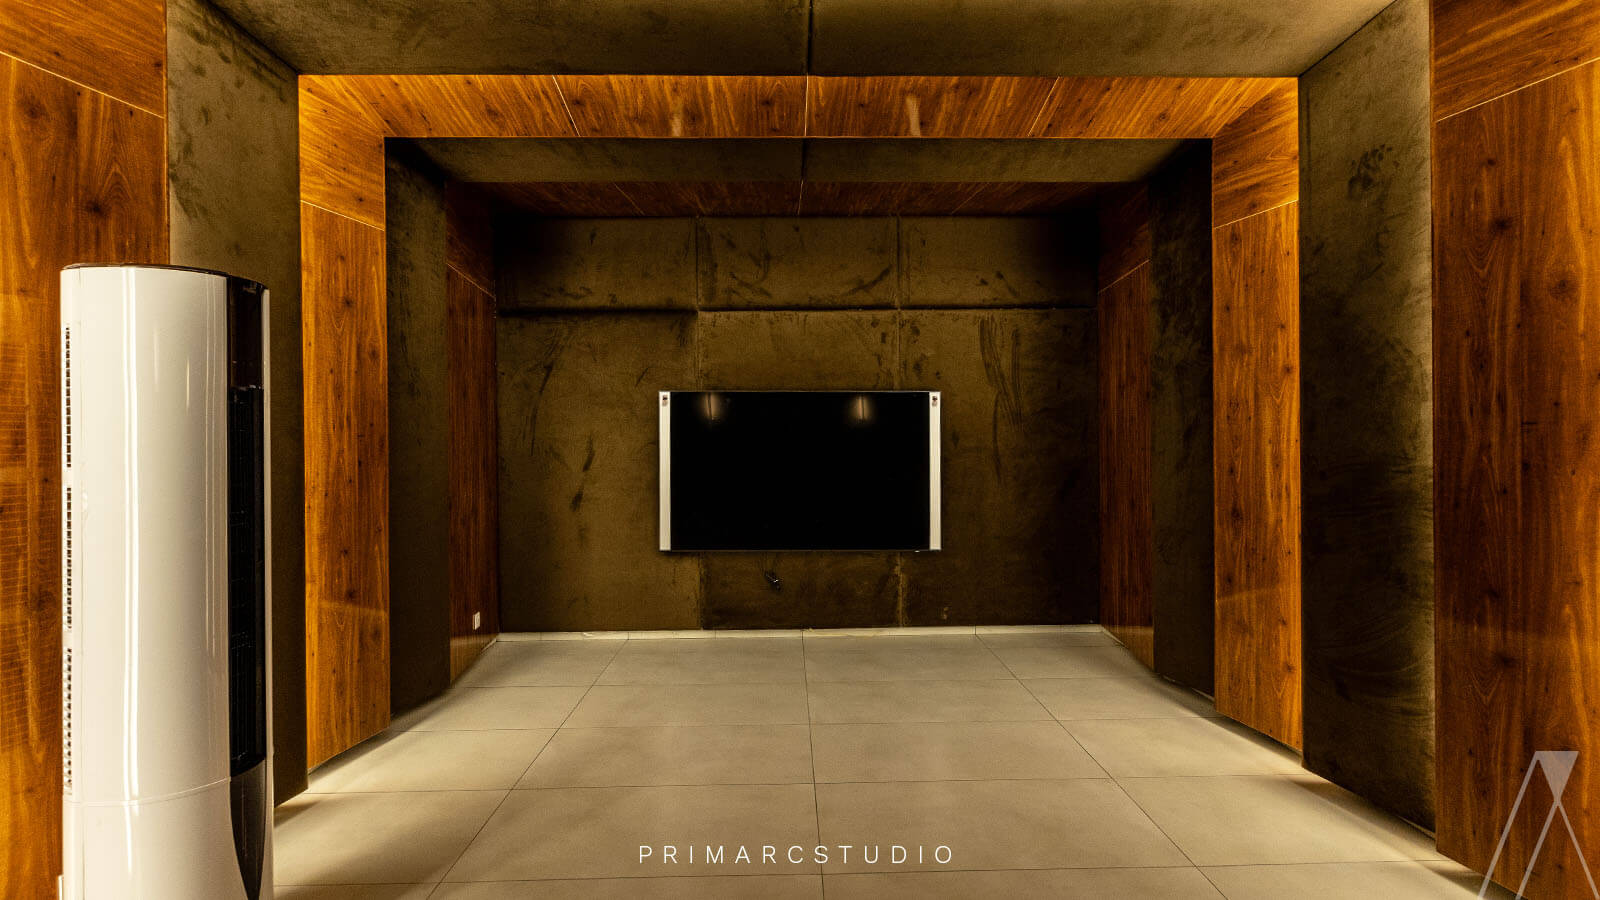 Media room in the basement with soundproof walls and lighting